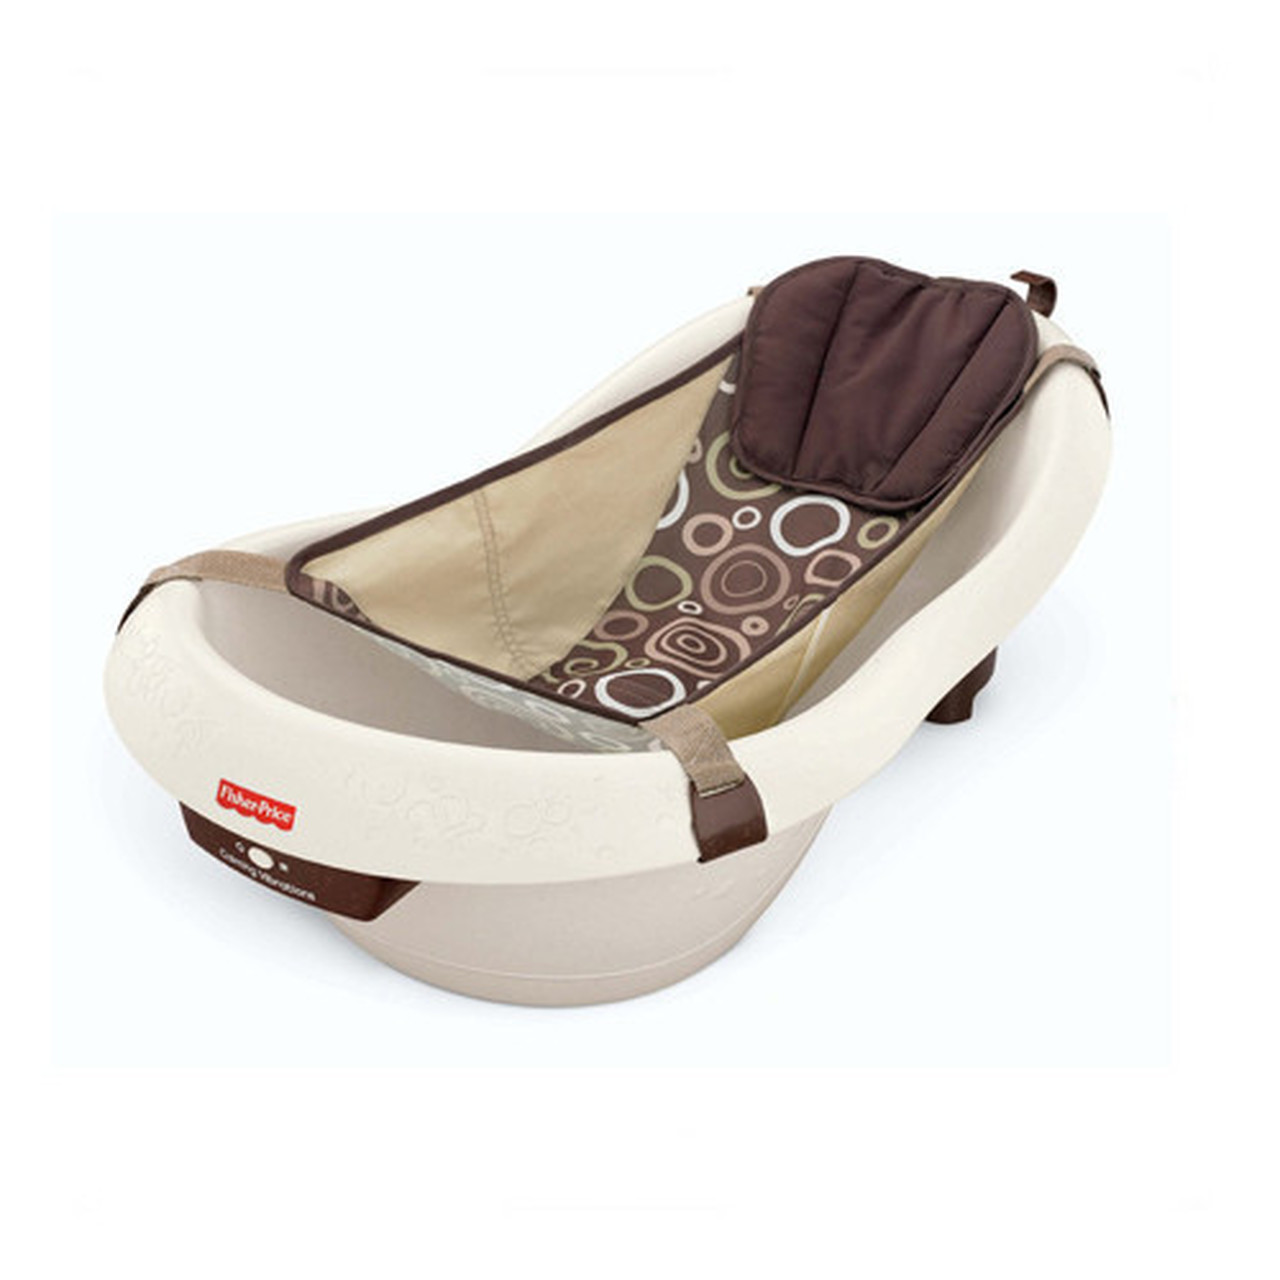 Fisher-Price Calming Waters Vibration Bathing Tub